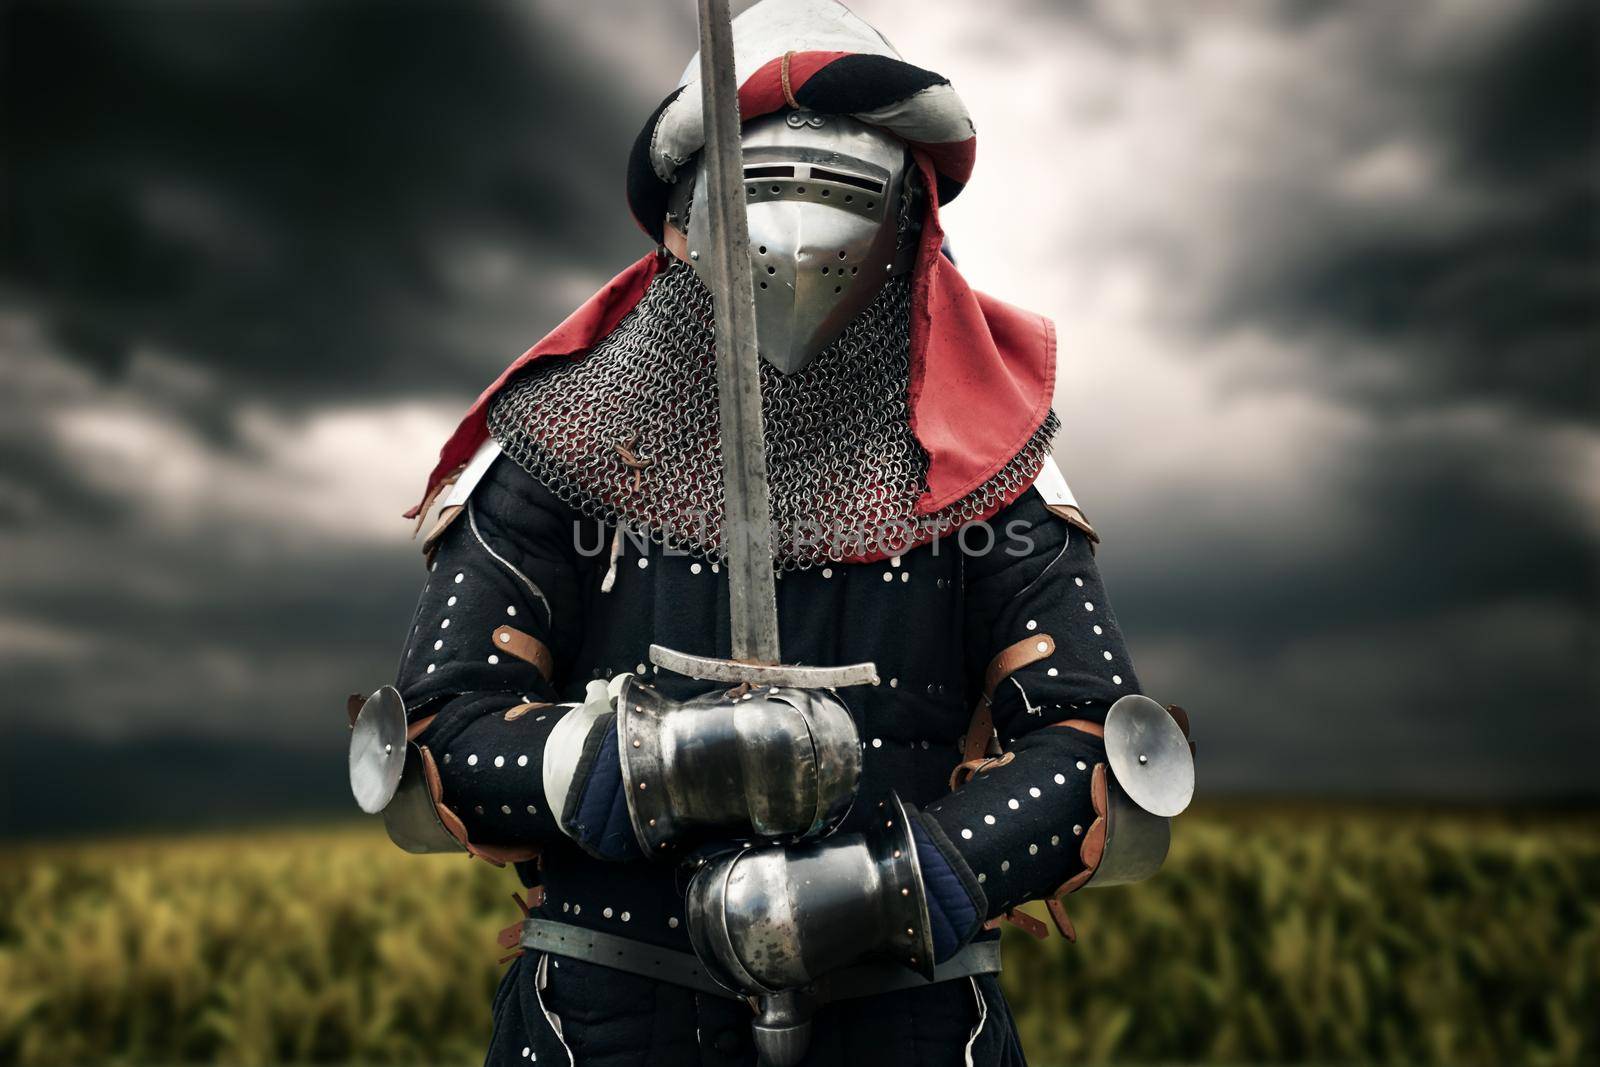 Front view of medieval knight in iron armor and headband posing and holding big sword. Portrait of brave man standing in field while sky is gray and cloudy. Concept of warrior, middle ages.